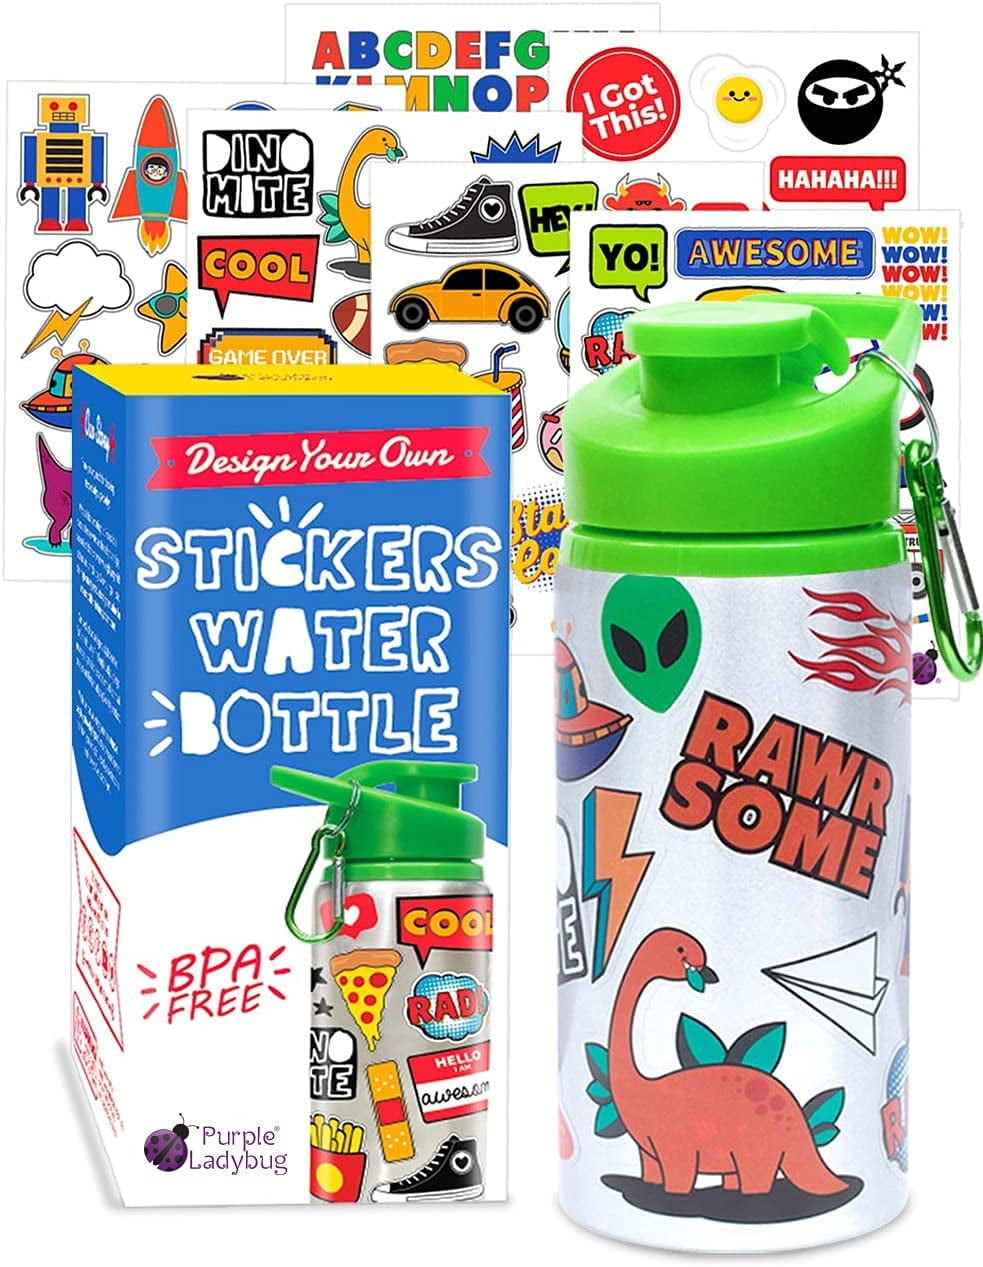 BPA Free Kids Water Bottle Purple Ladybug Decorate Your Own Water Bottle for Boys Craft Kit with Tons of Fun On-Trend Stickers Great Boy Gift Idea Fun & Creative DIY Kids Arts & Crafts Activity 